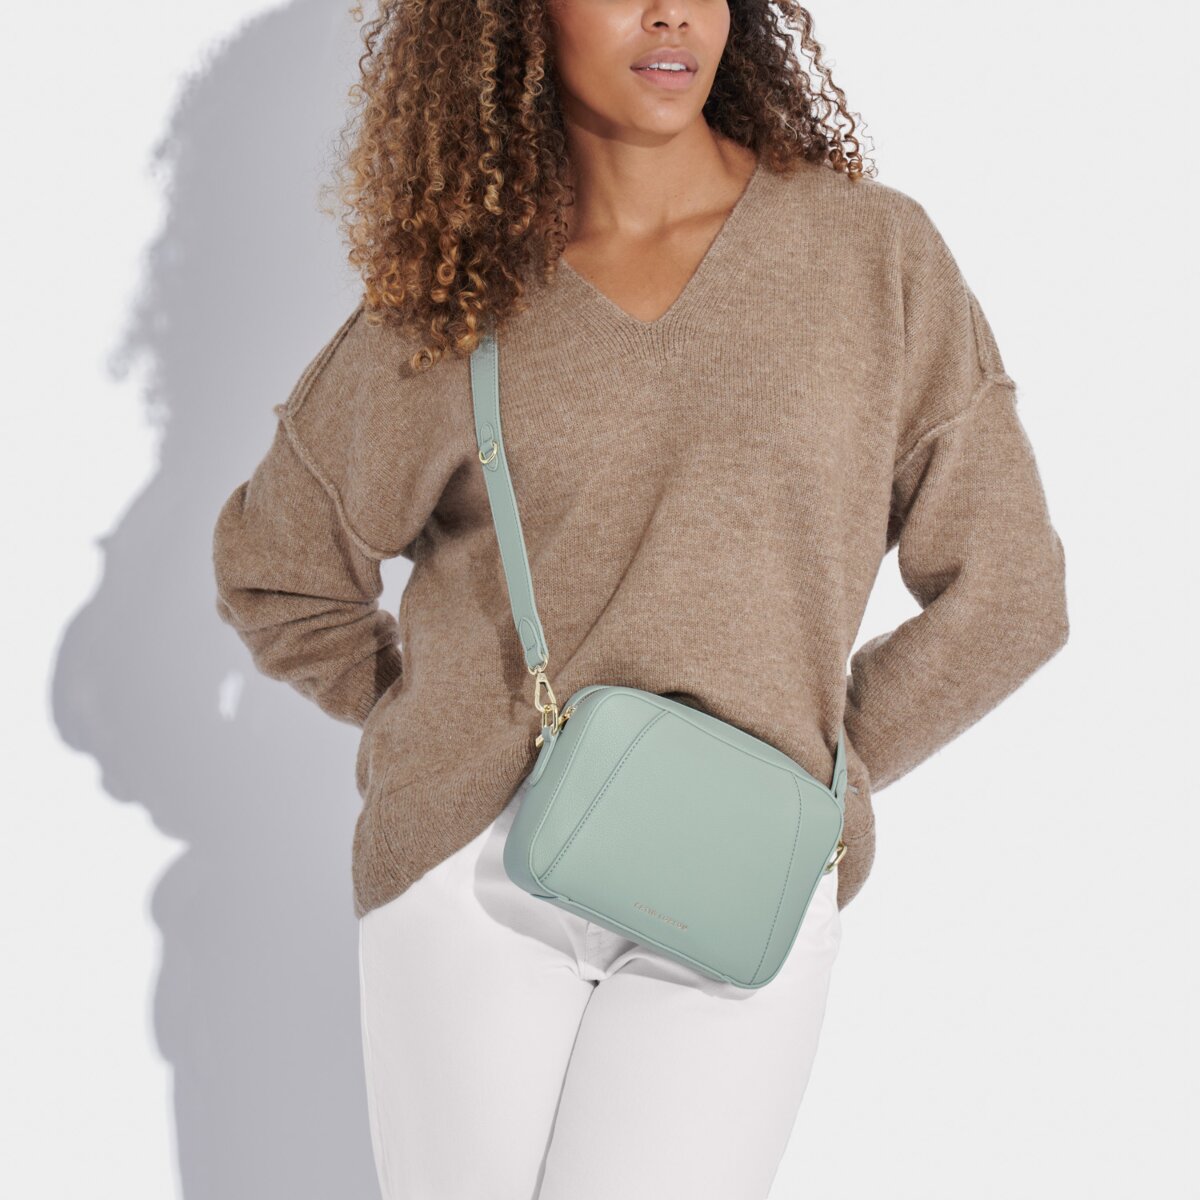 Model wearing white jeans and brown jumper with a duck egg blue crossbody handbag